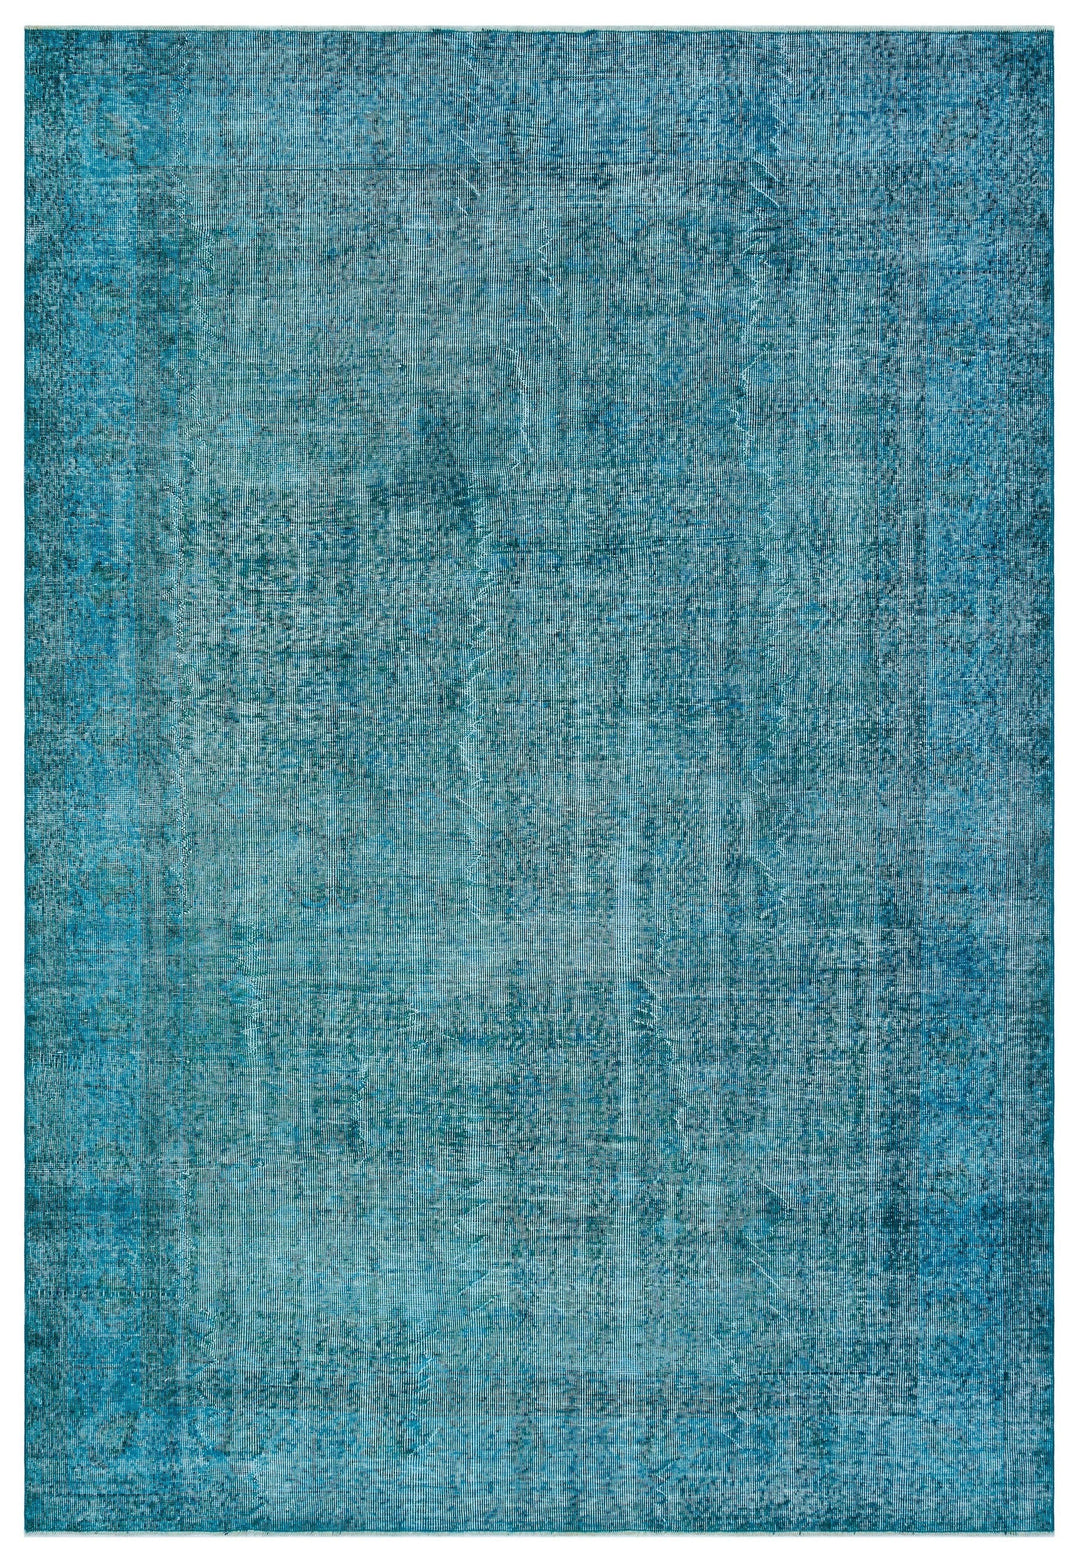 Athens Turquoise Tumbled Wool Hand Woven Carpet 213 x 306